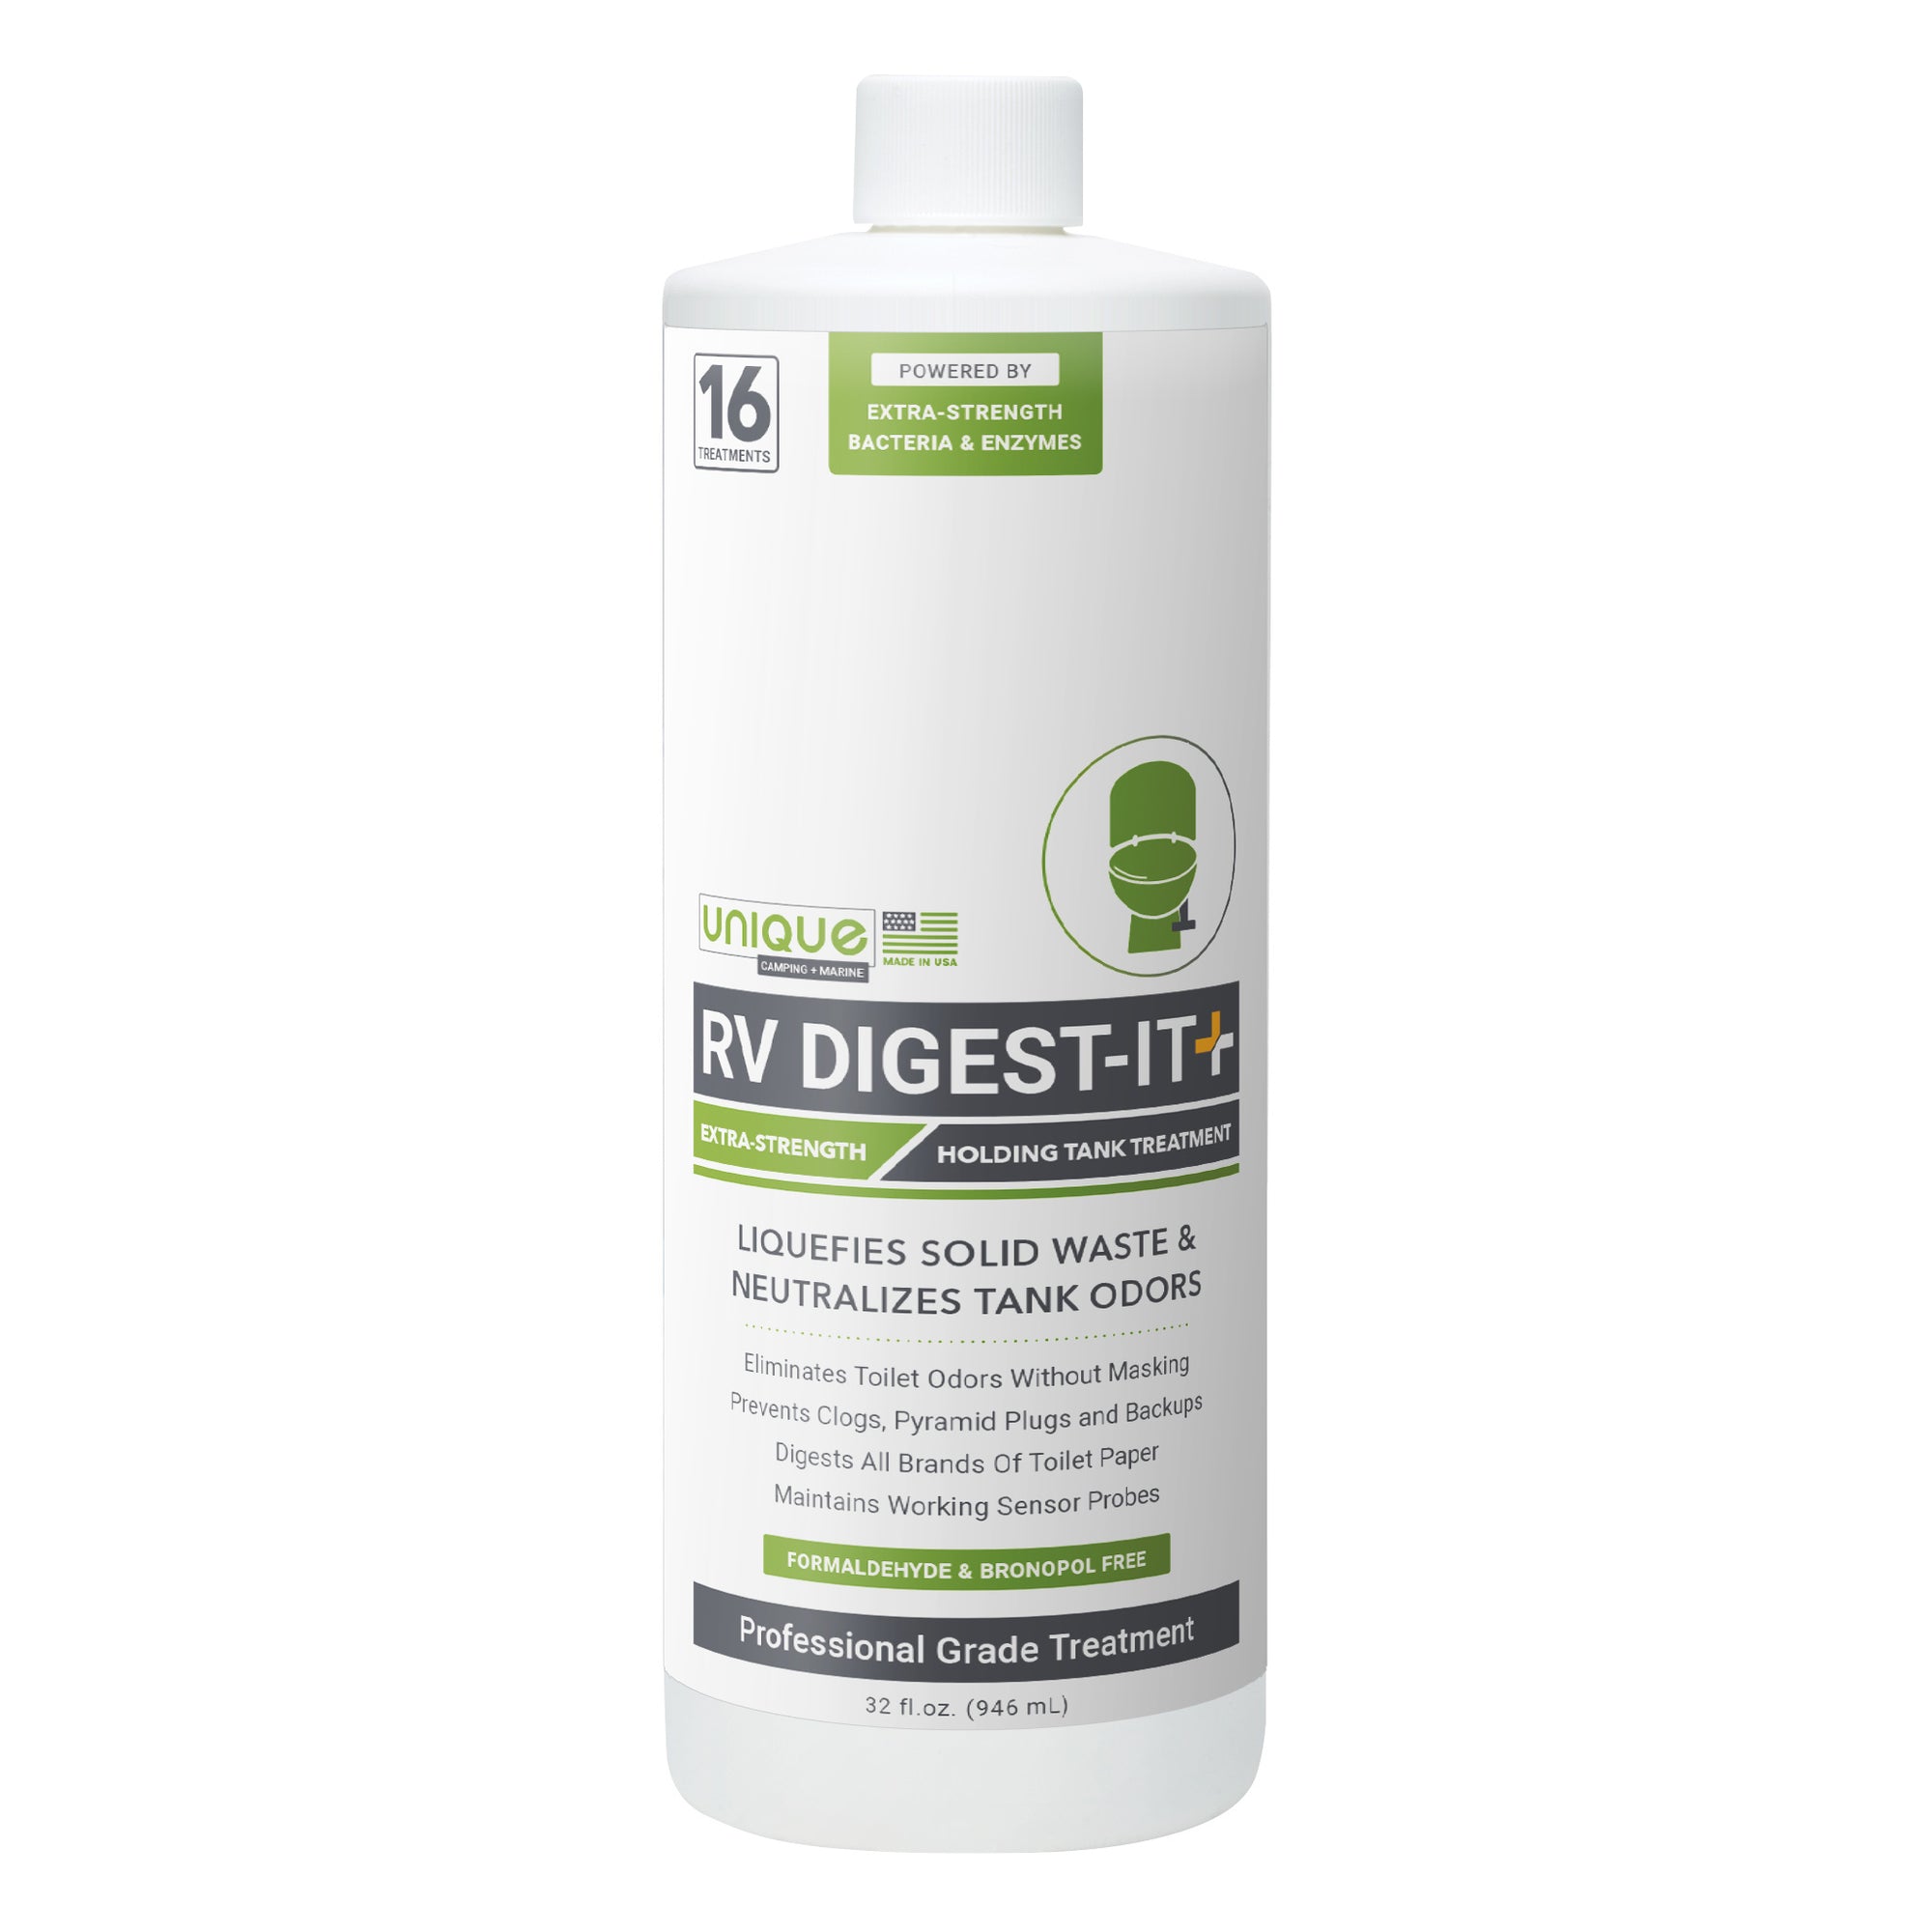 RV Digest-It+ Extra Strength Holding Tank Treatment. New Product! Unique Camping + Marine